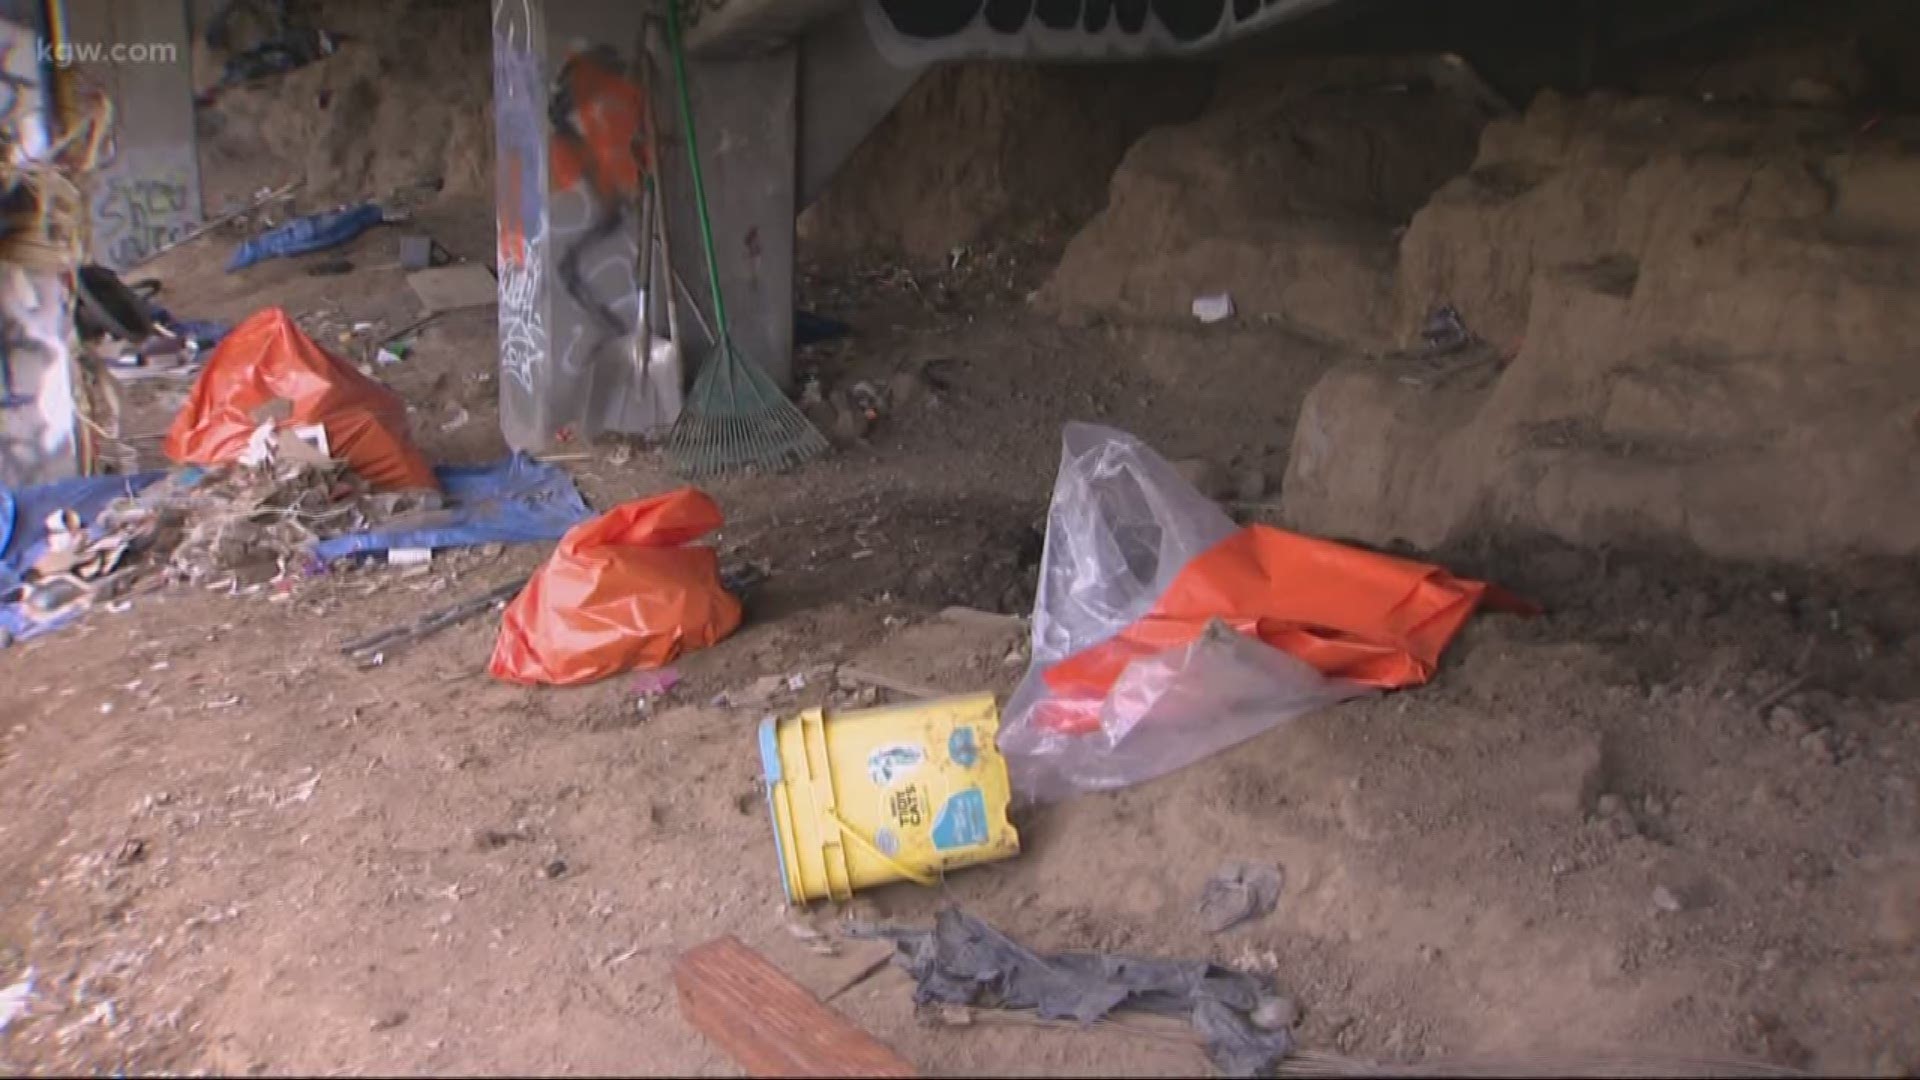 ODOT crews cleared a homeless camp from under Highway 99.